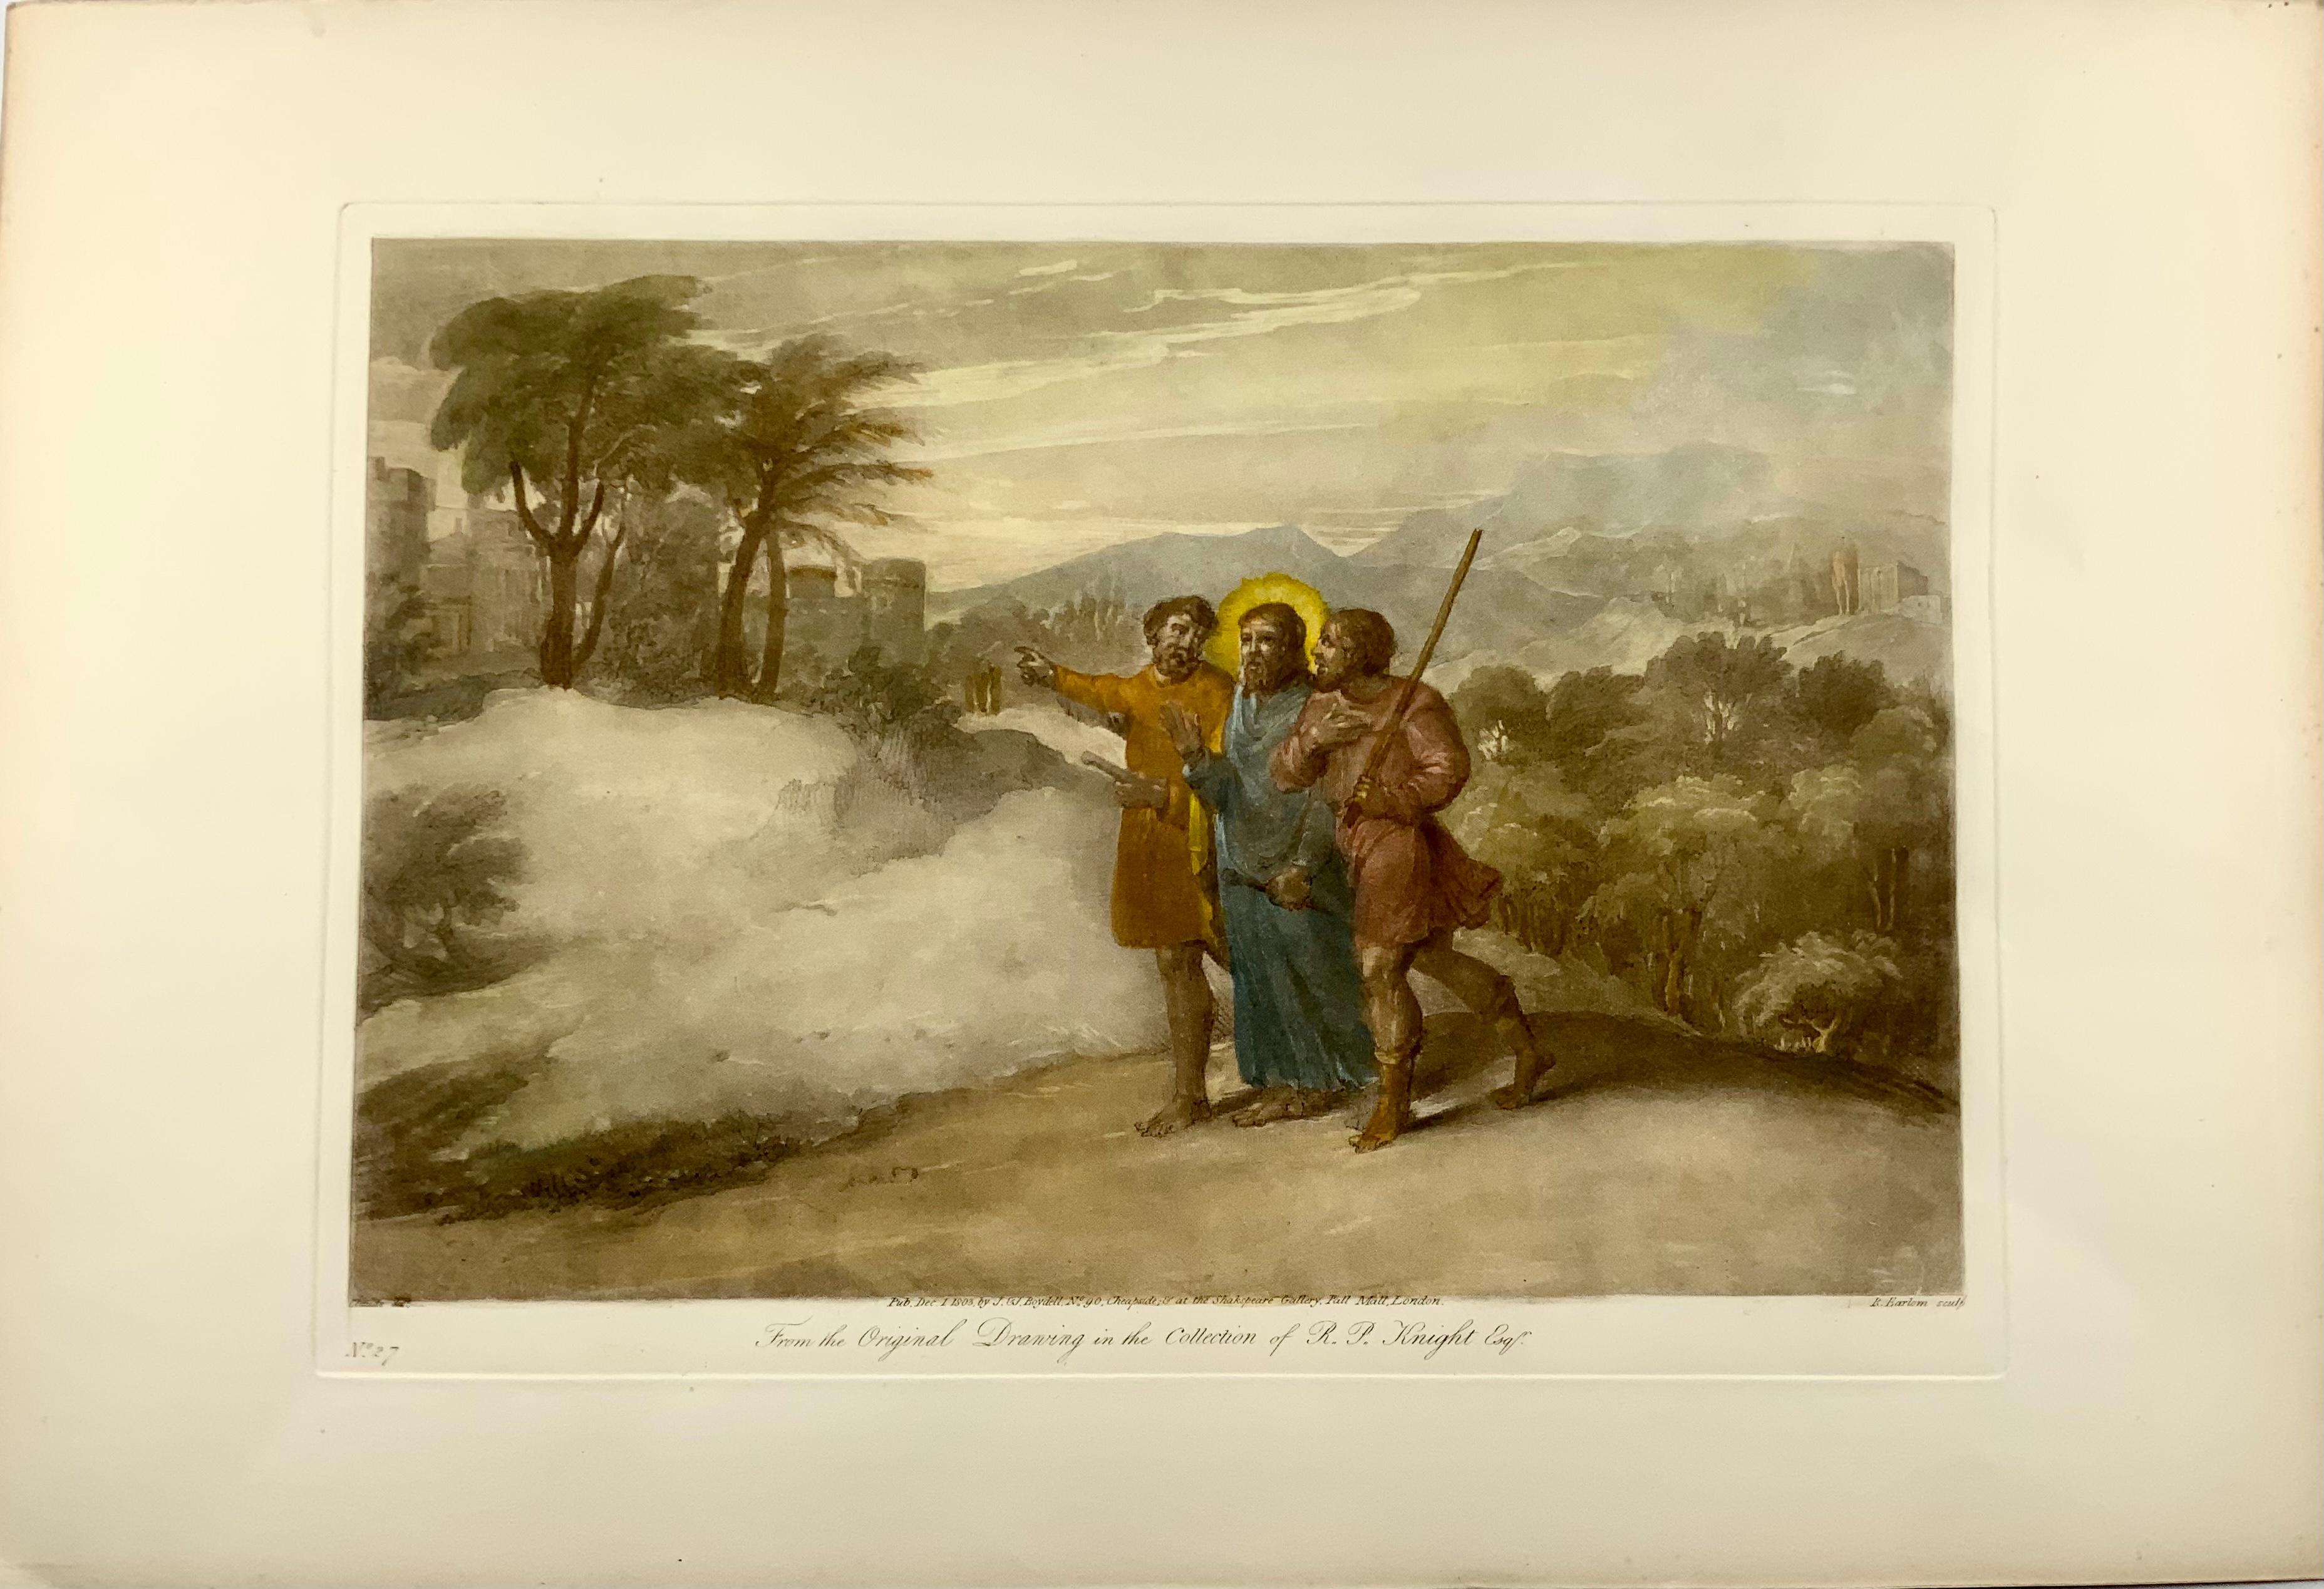 Christ and His Disciples Going to Emmaus

Etching with mezzotint by Richard Earlom. Later hand color.

After the original designs of Claude le Lorrain by Richard Earlom, May 14 1743-October 1822, who was an English printmaker and draftsman, best